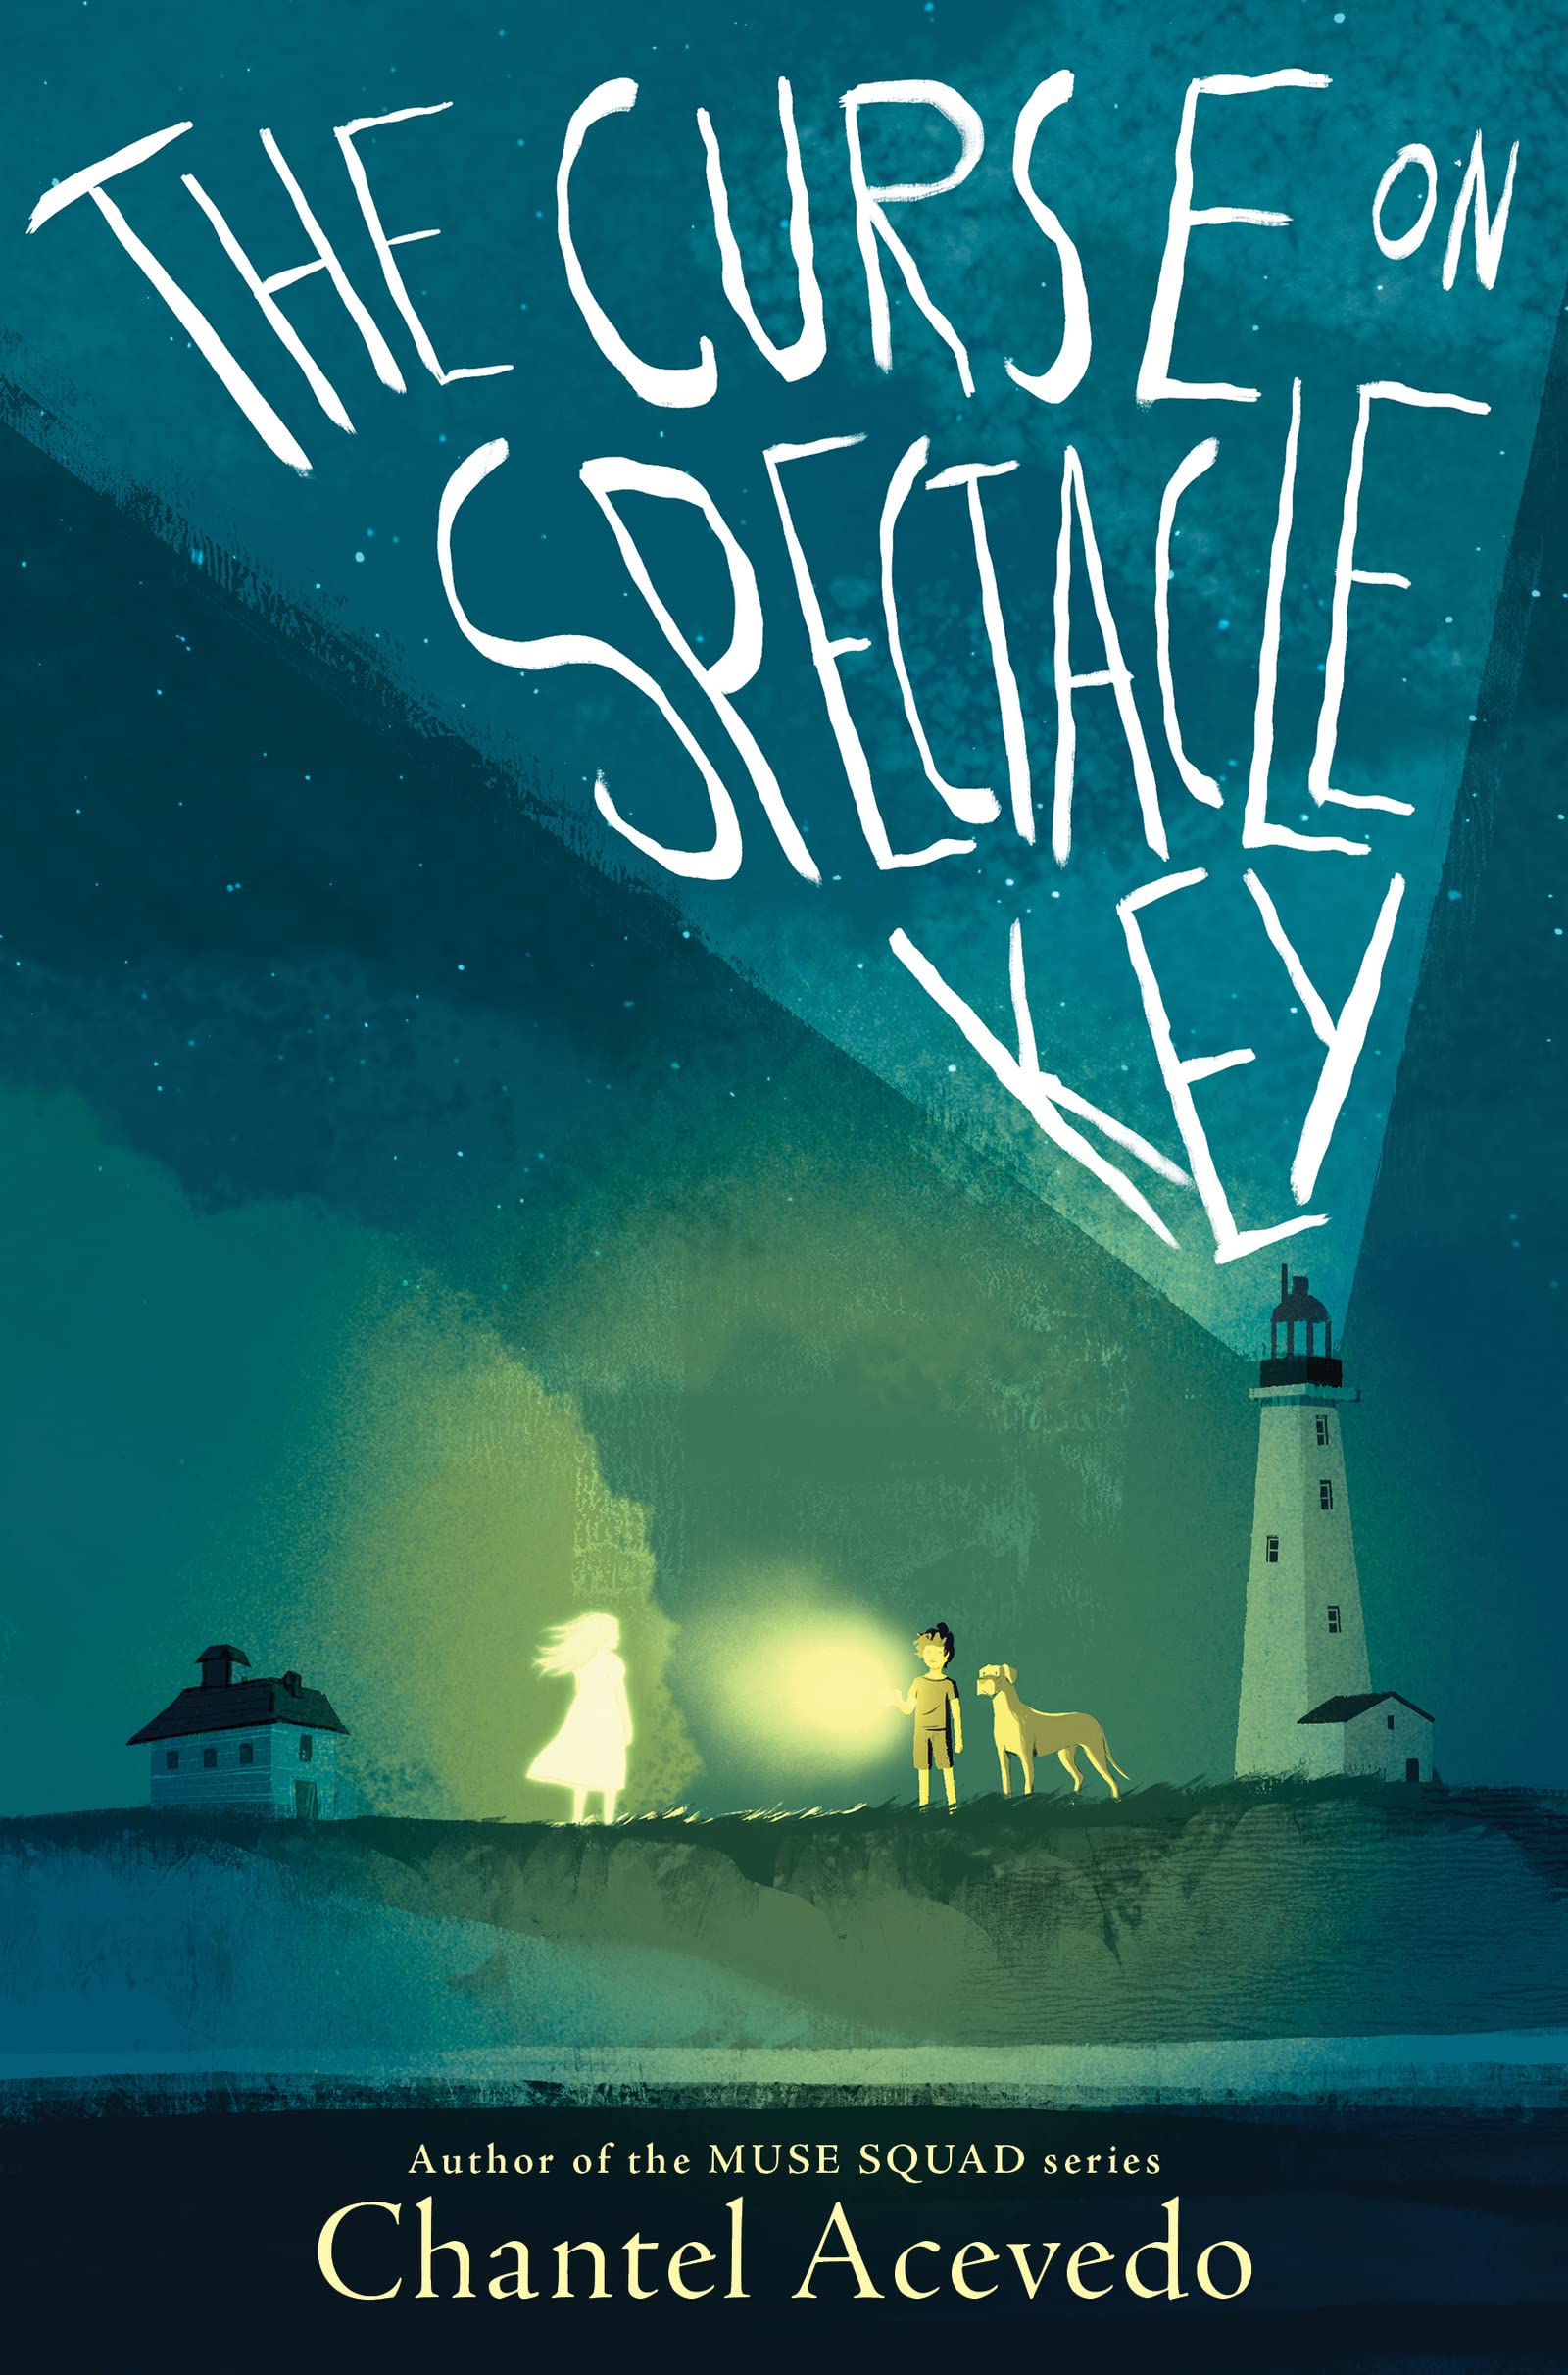 The Curse on Spectacle Key by Chantel Acevedo